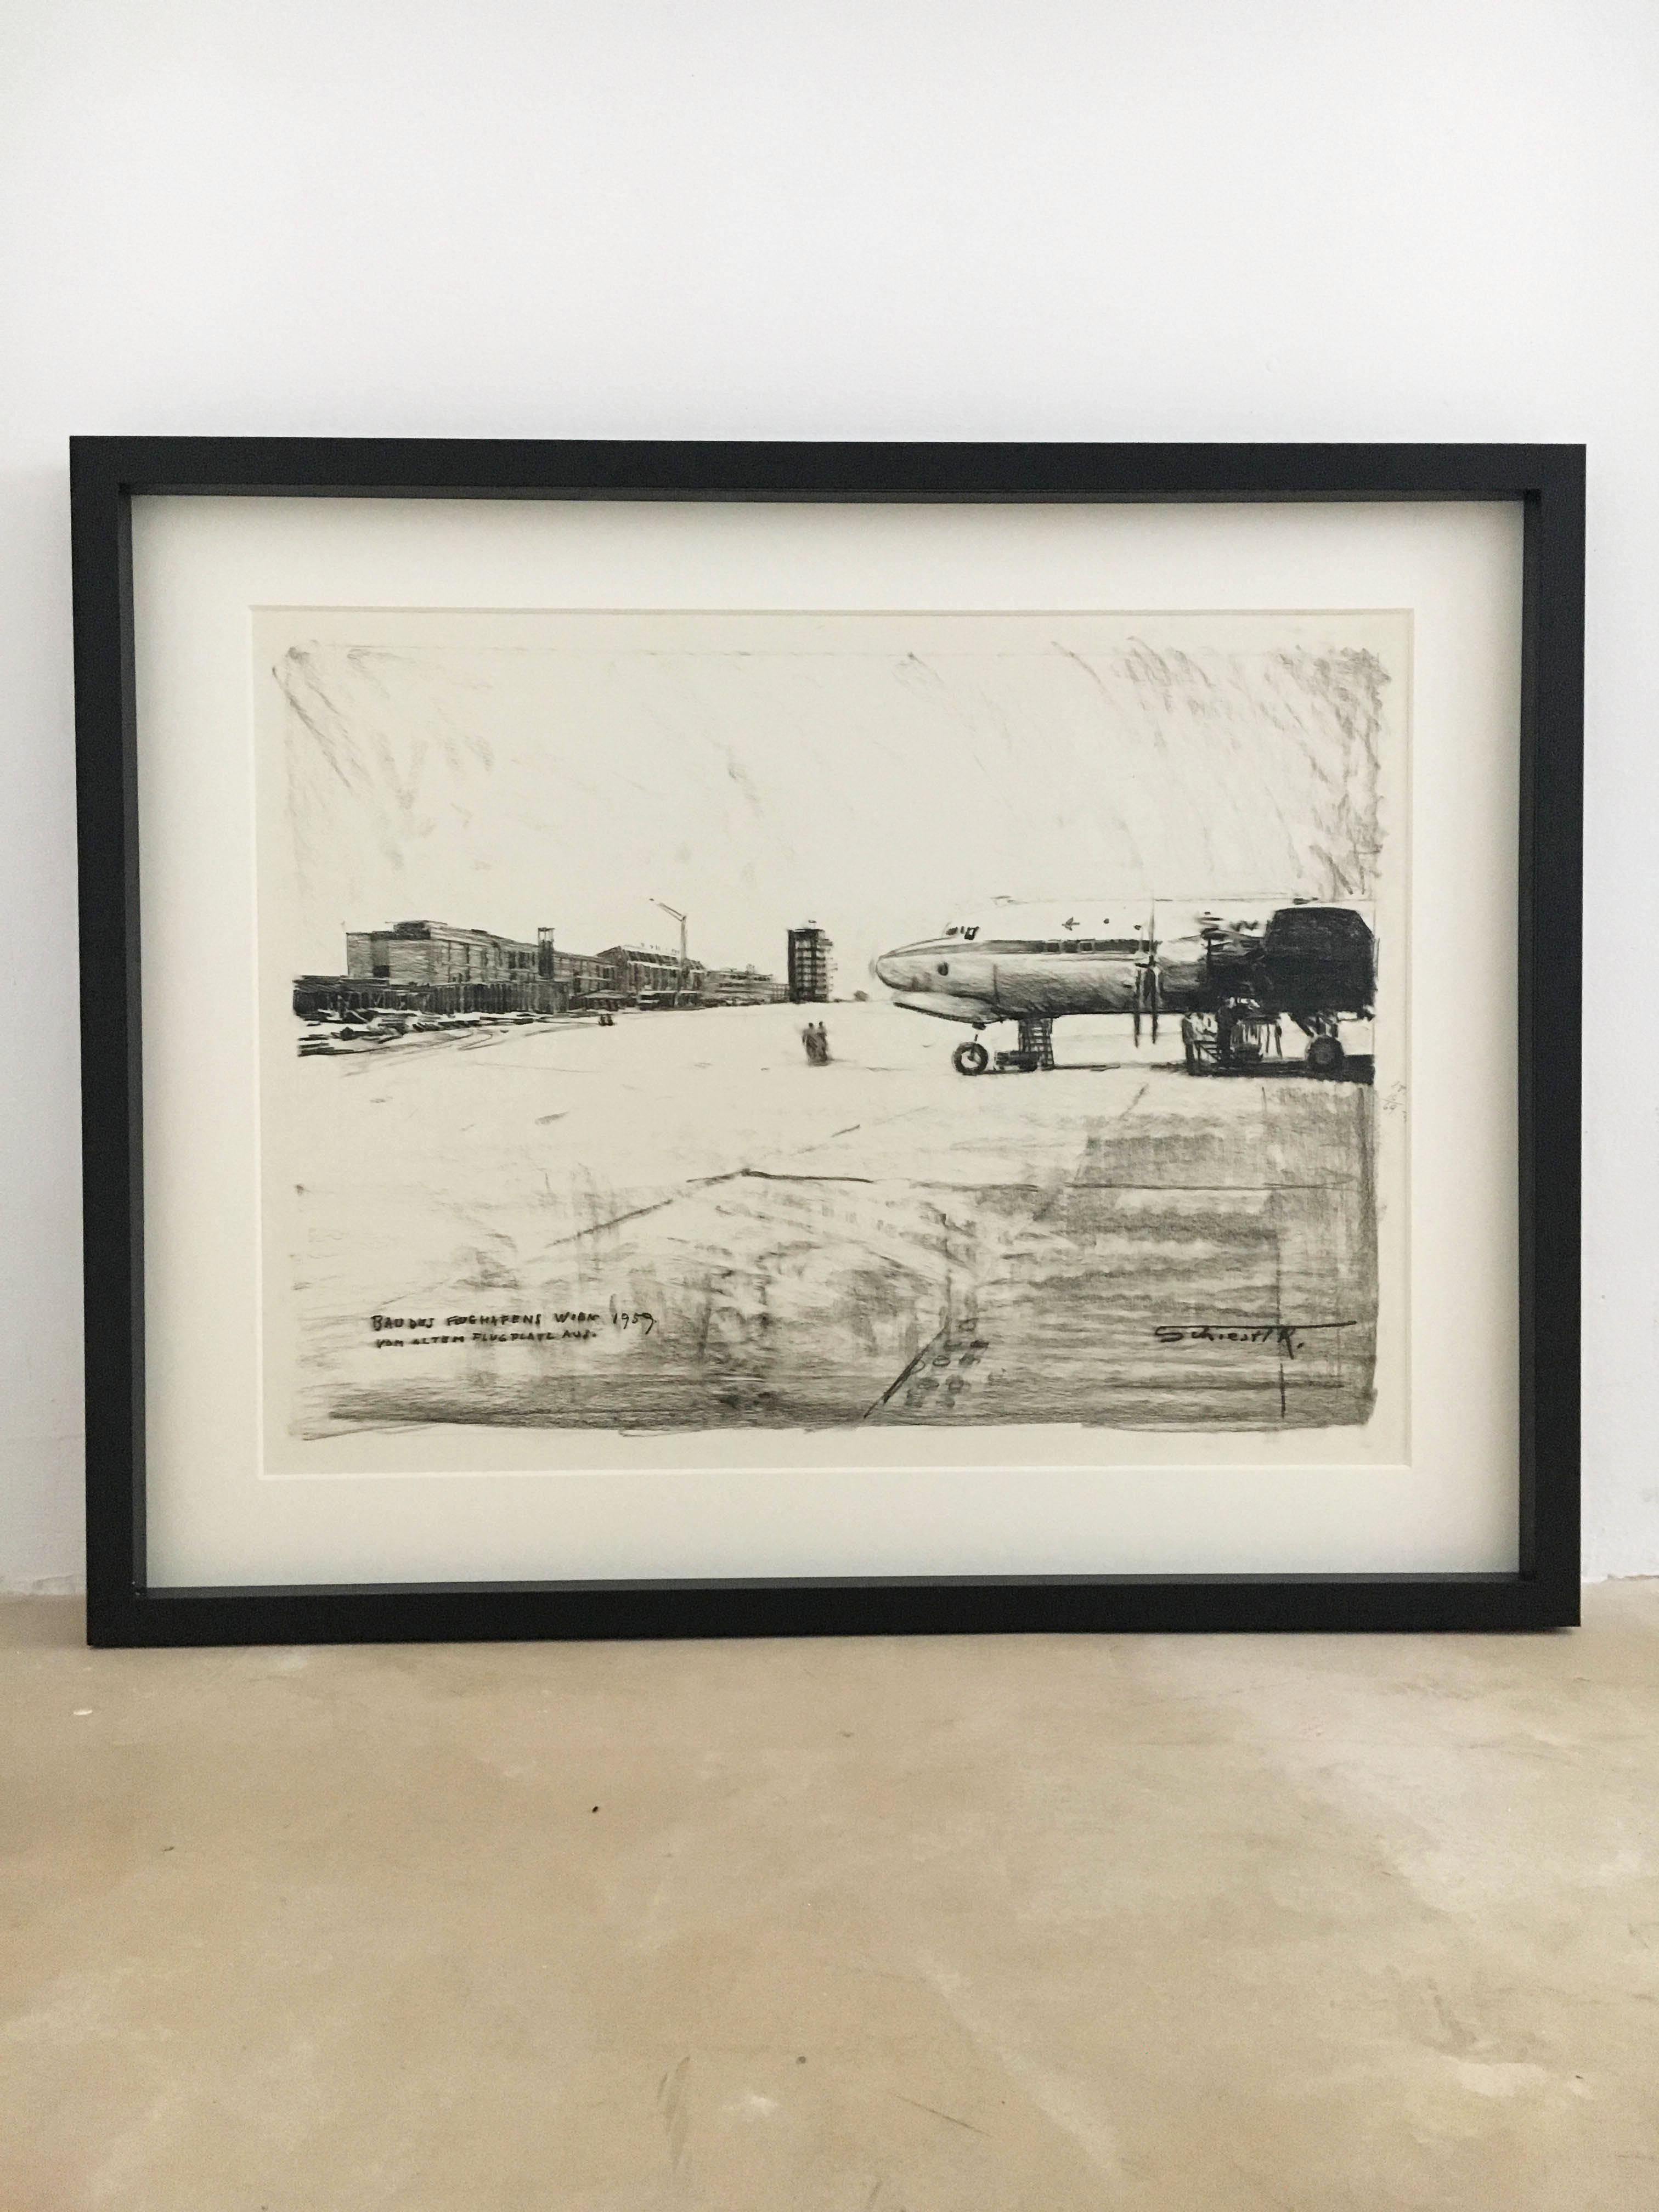 A rare set of four charcoal drawings on paper of the newly build Airport Vienna in 1959. Strikingly modern in it's rough, fast and blurry technique, depicting the movement of planes, people and architecture. This is very much a significant